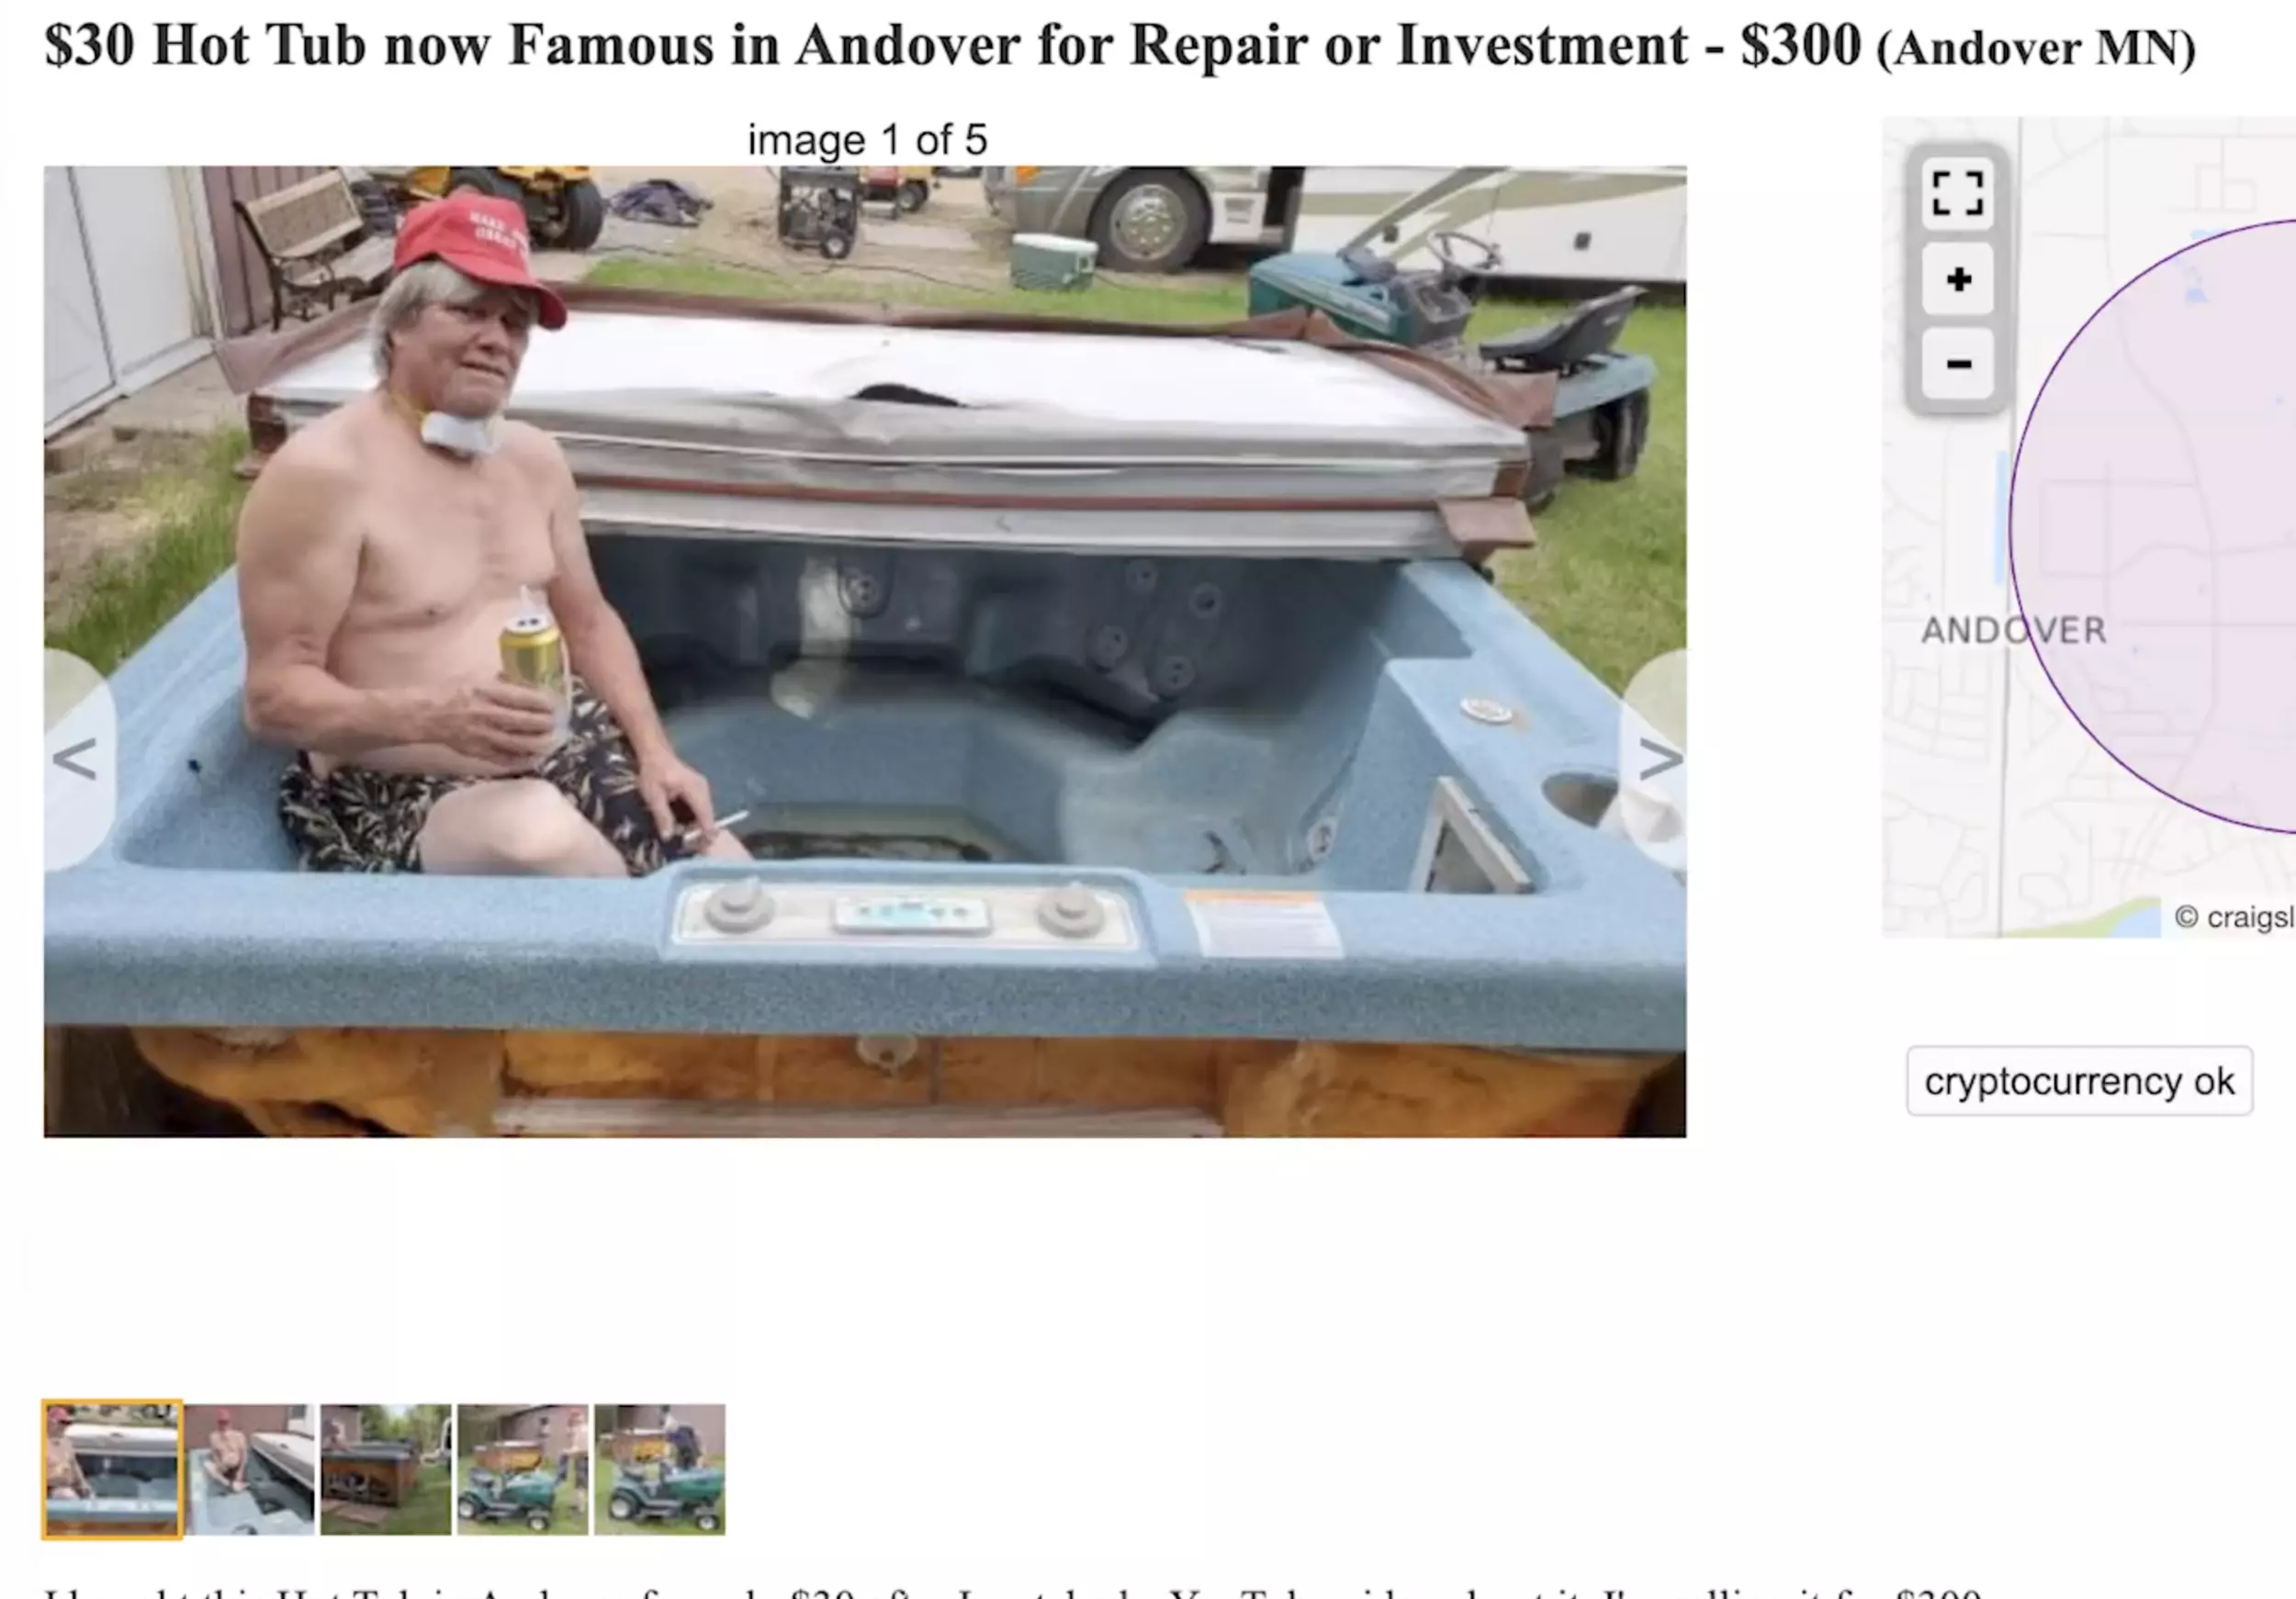 A Year Ago, Broken MN Hot Tub Becomes "Most Famous in the World"